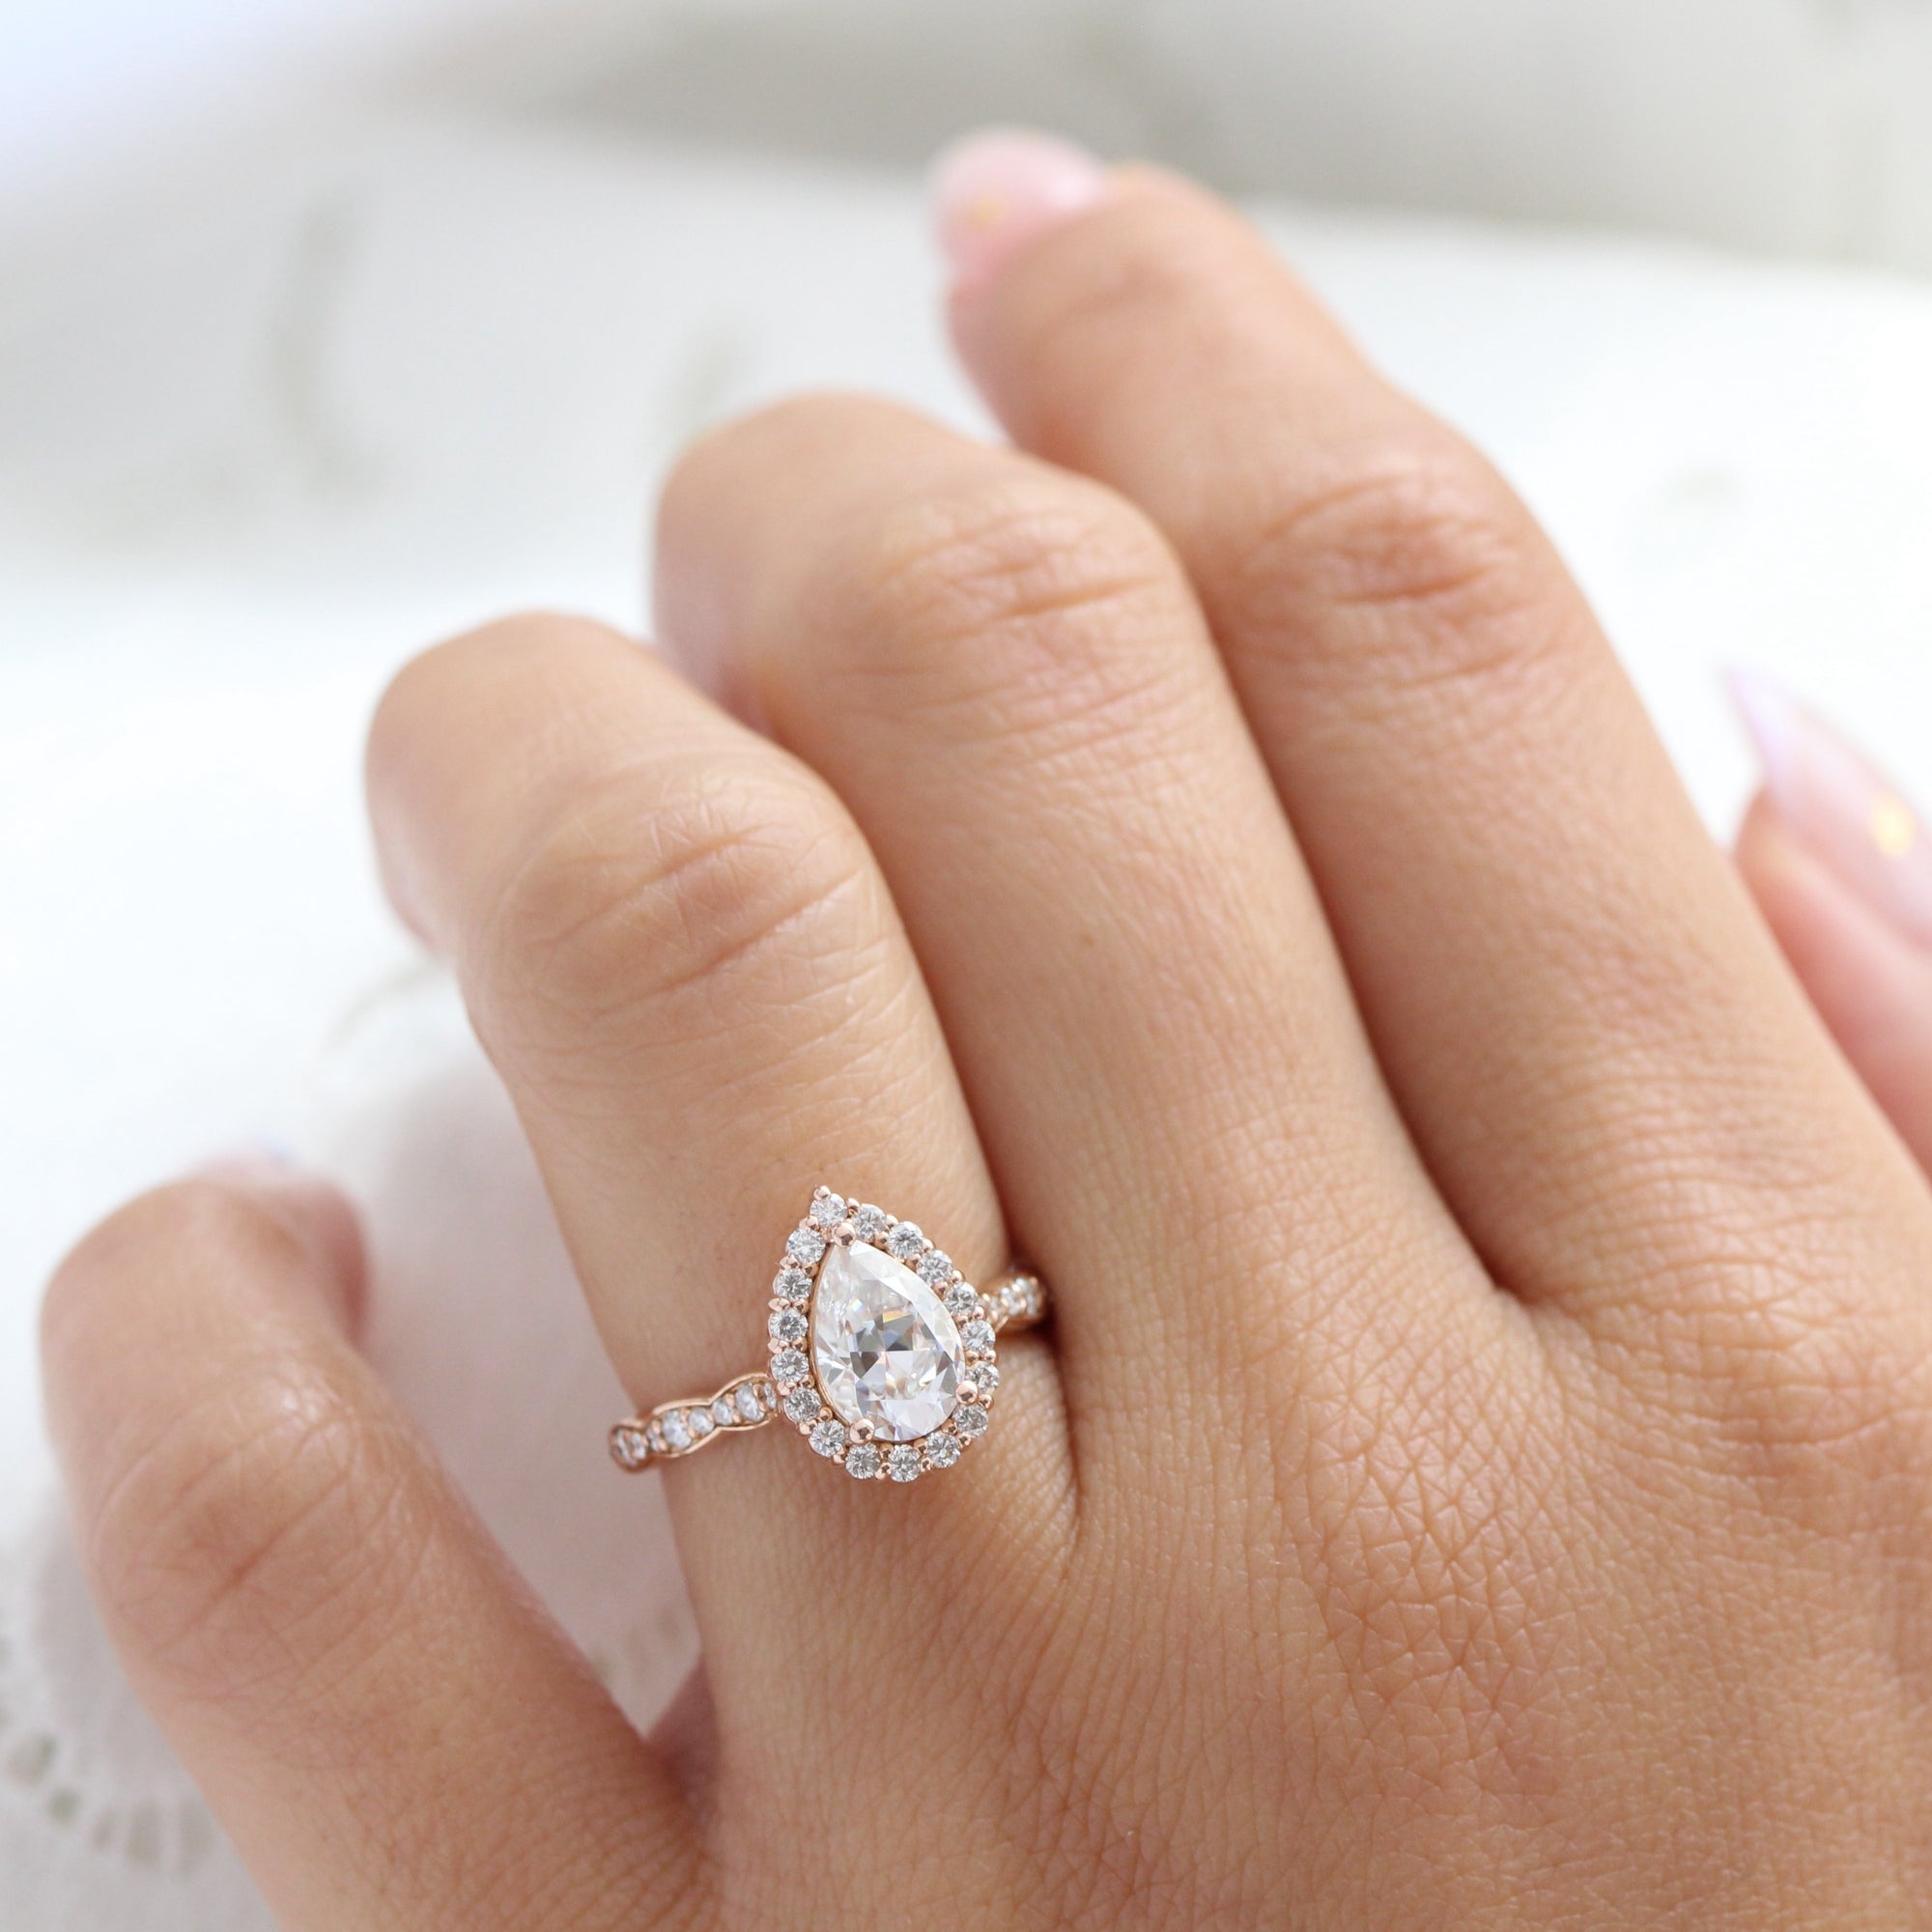 Halo diamond pear moissanite engagement ring in rose gold scalloped band by la more design